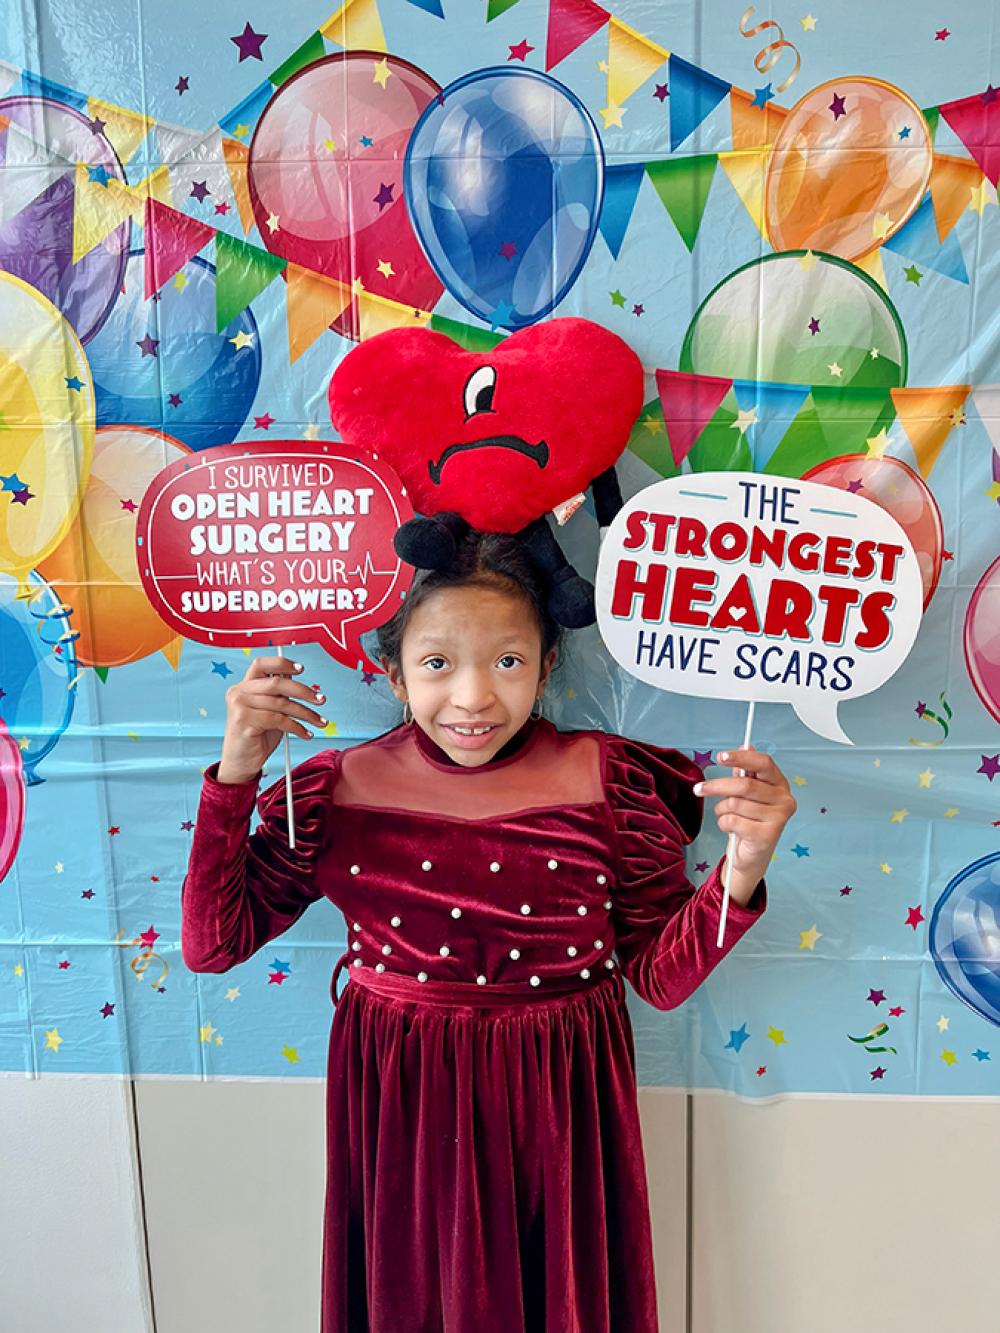 Chi Chi Holding Signs That Read I Survived Open Heart Surgery What’s Your Superpower? and The Strongest Hearts Have Scars